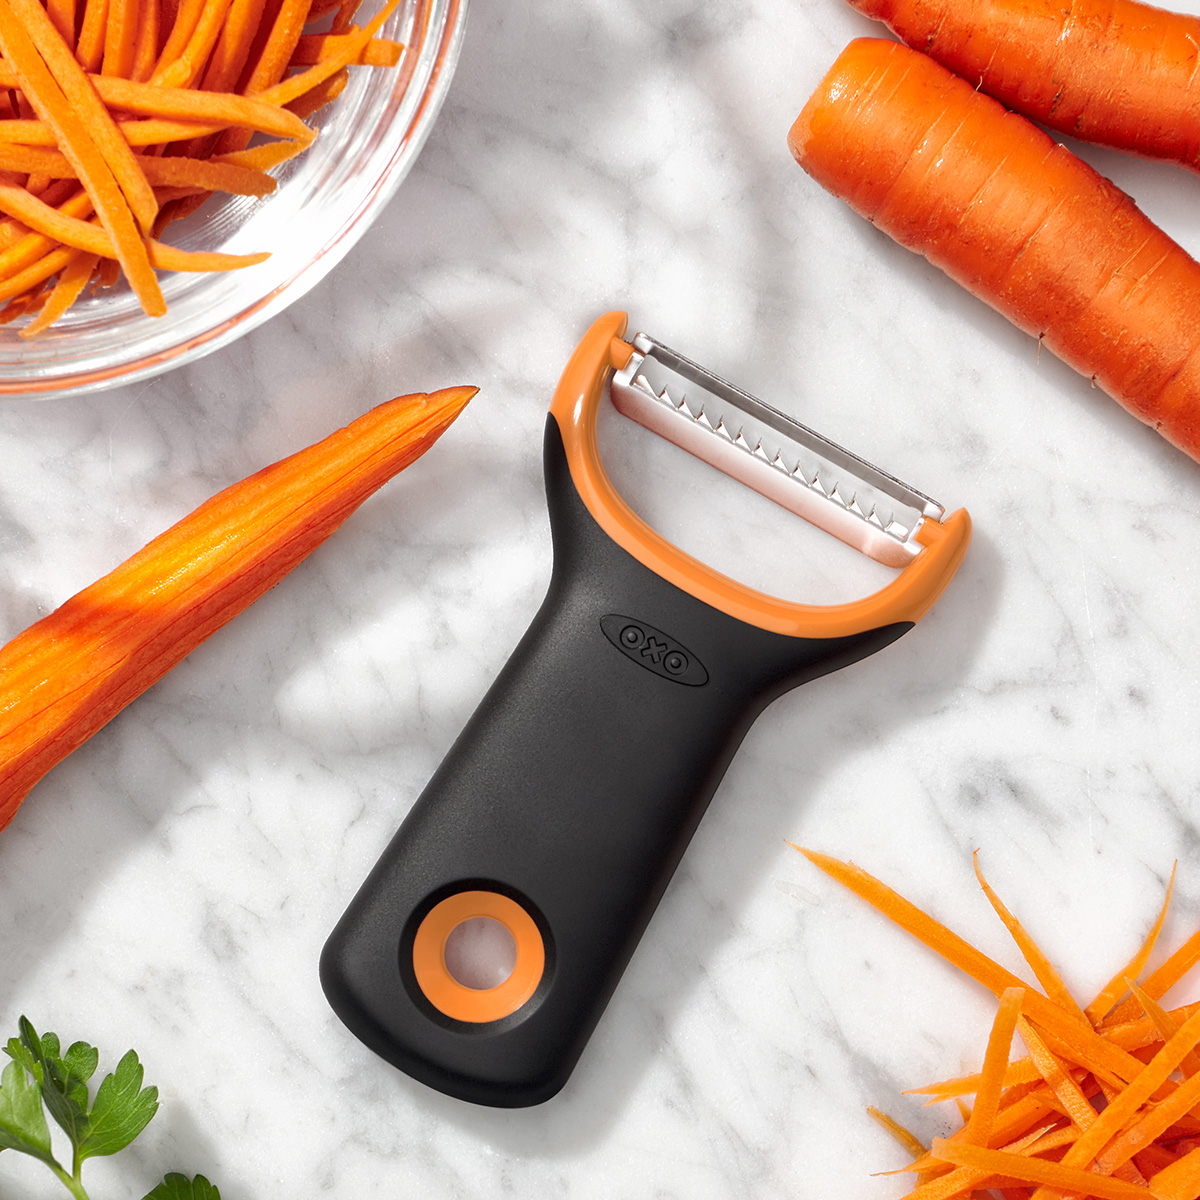 https://www.containerstore.com/catalogimages/436112/10088095-OXO-Peeler-VEN6.jpg